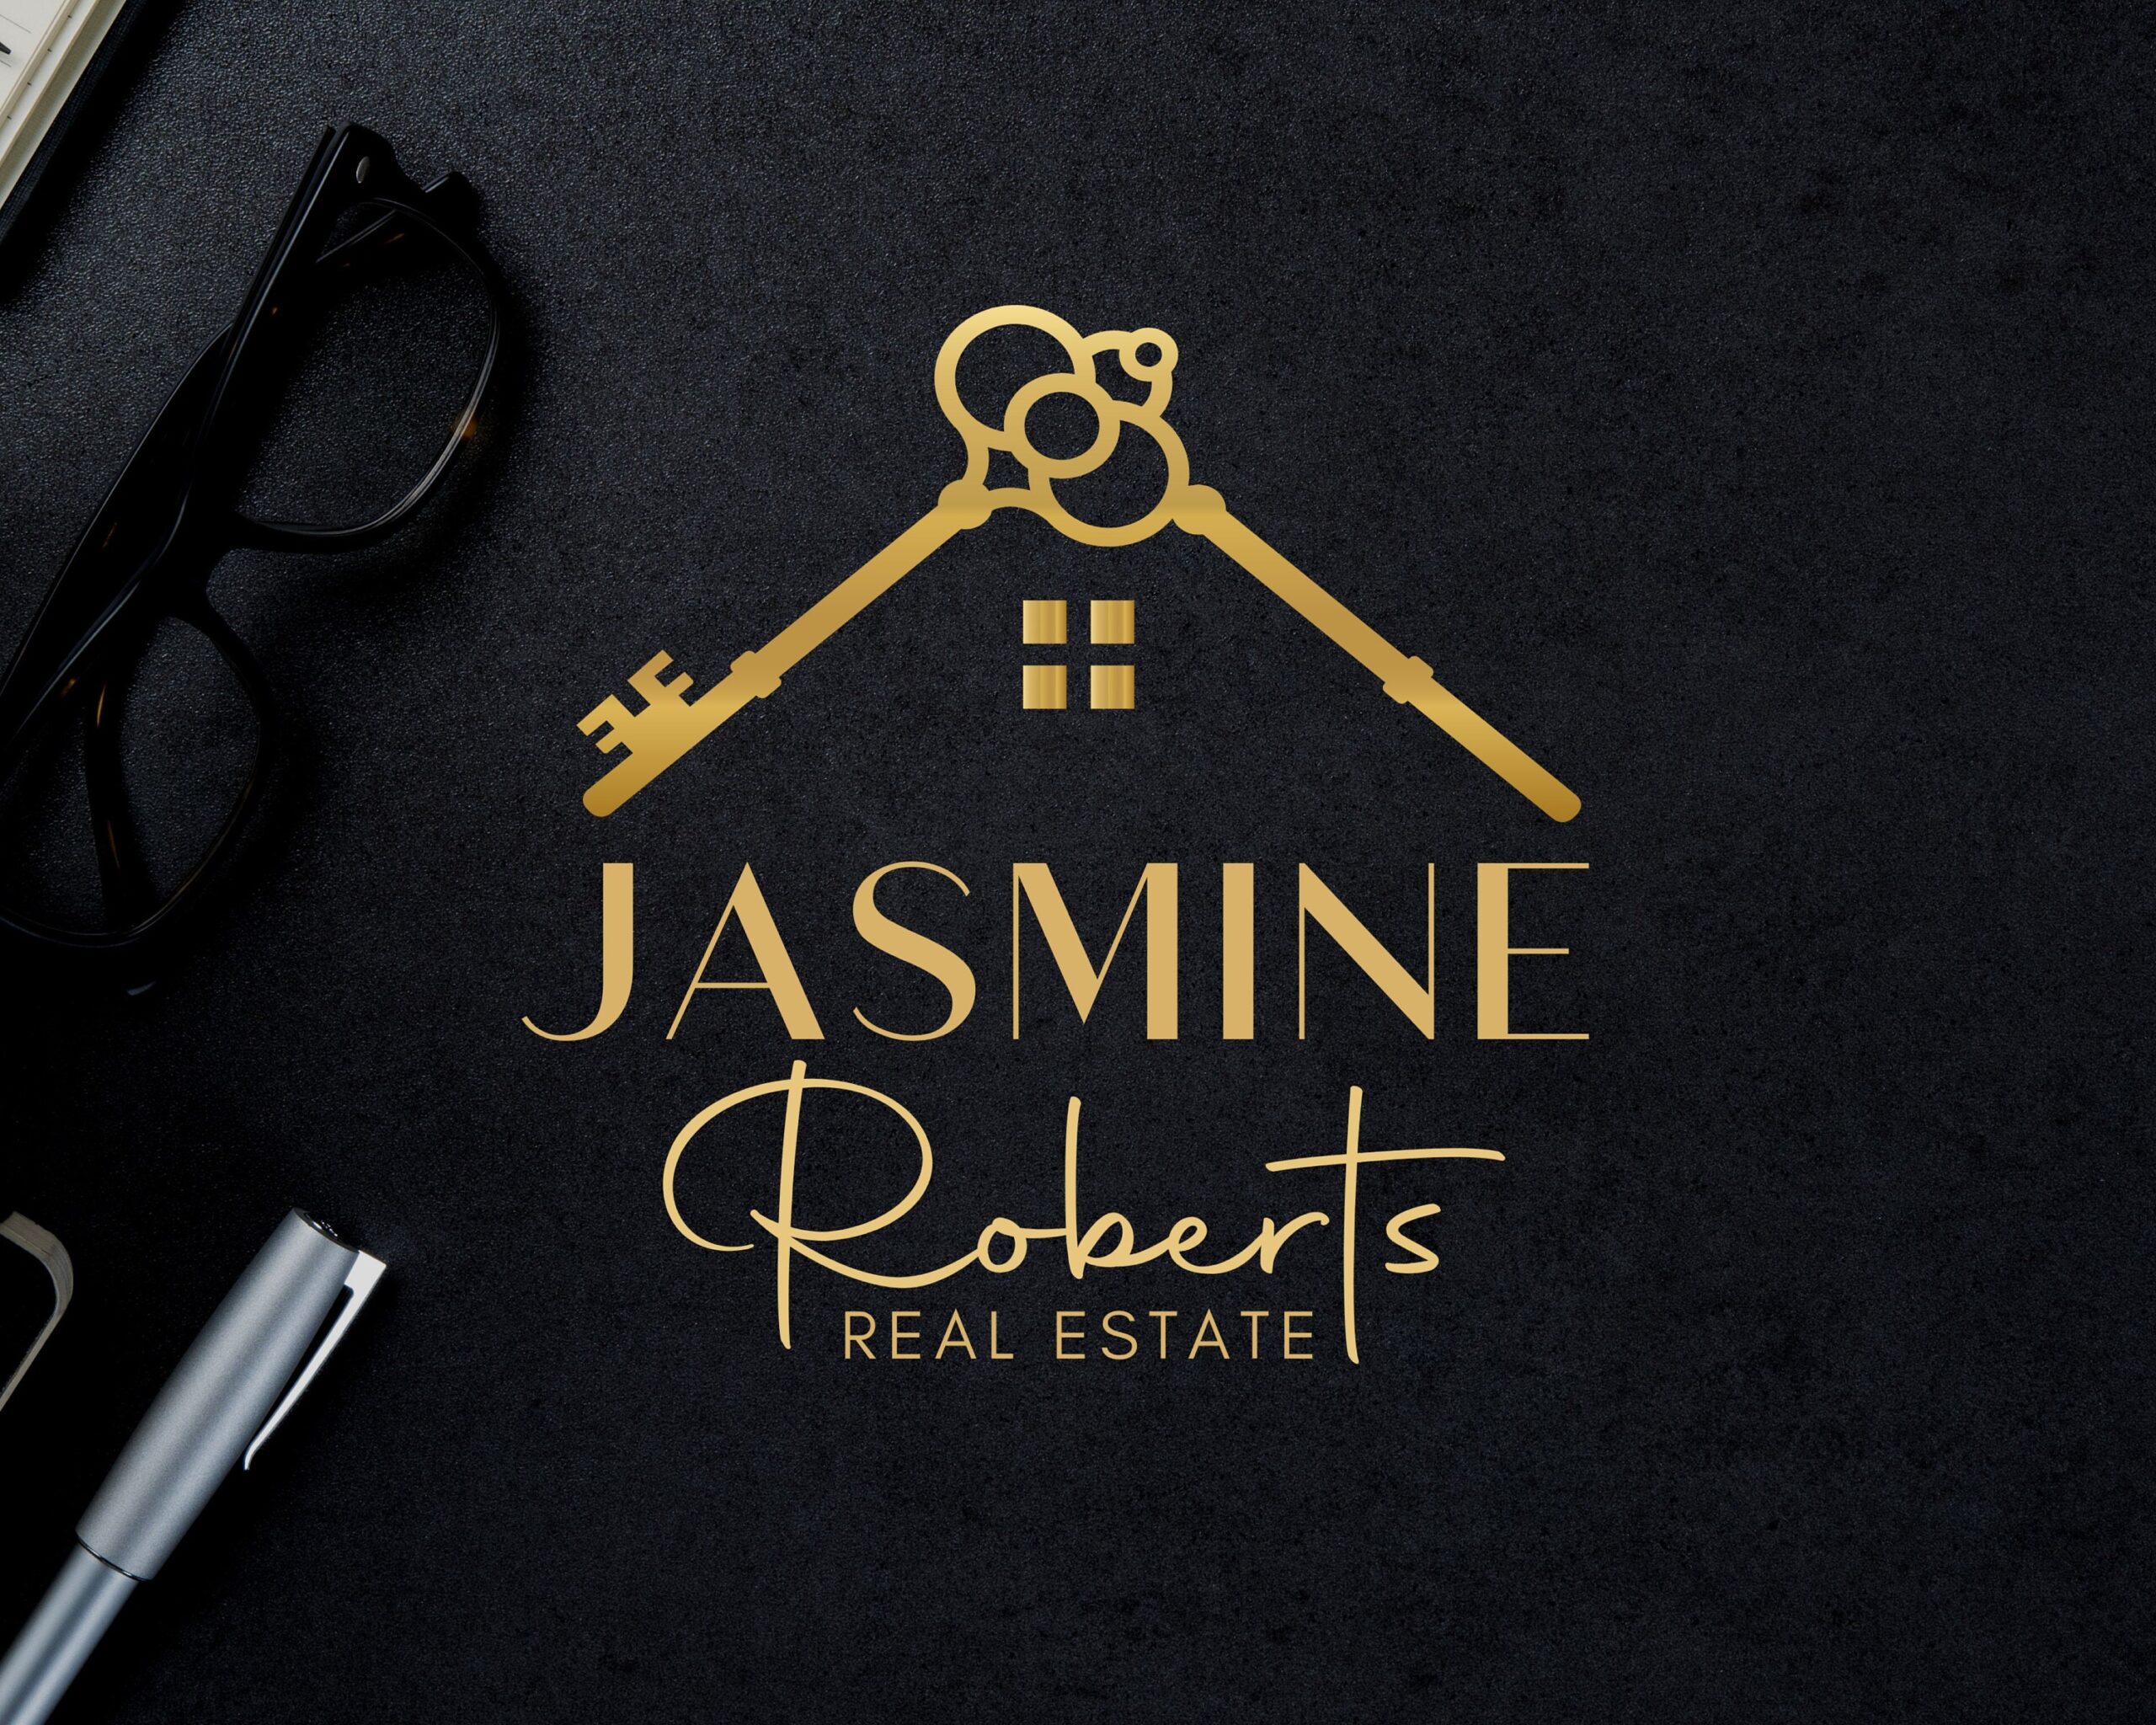 Real Estate Gold Premium Logo Design -  Full Set: Logo + Sublogo + Watermarks all included - High-Quality Branding for Real Estate Agents